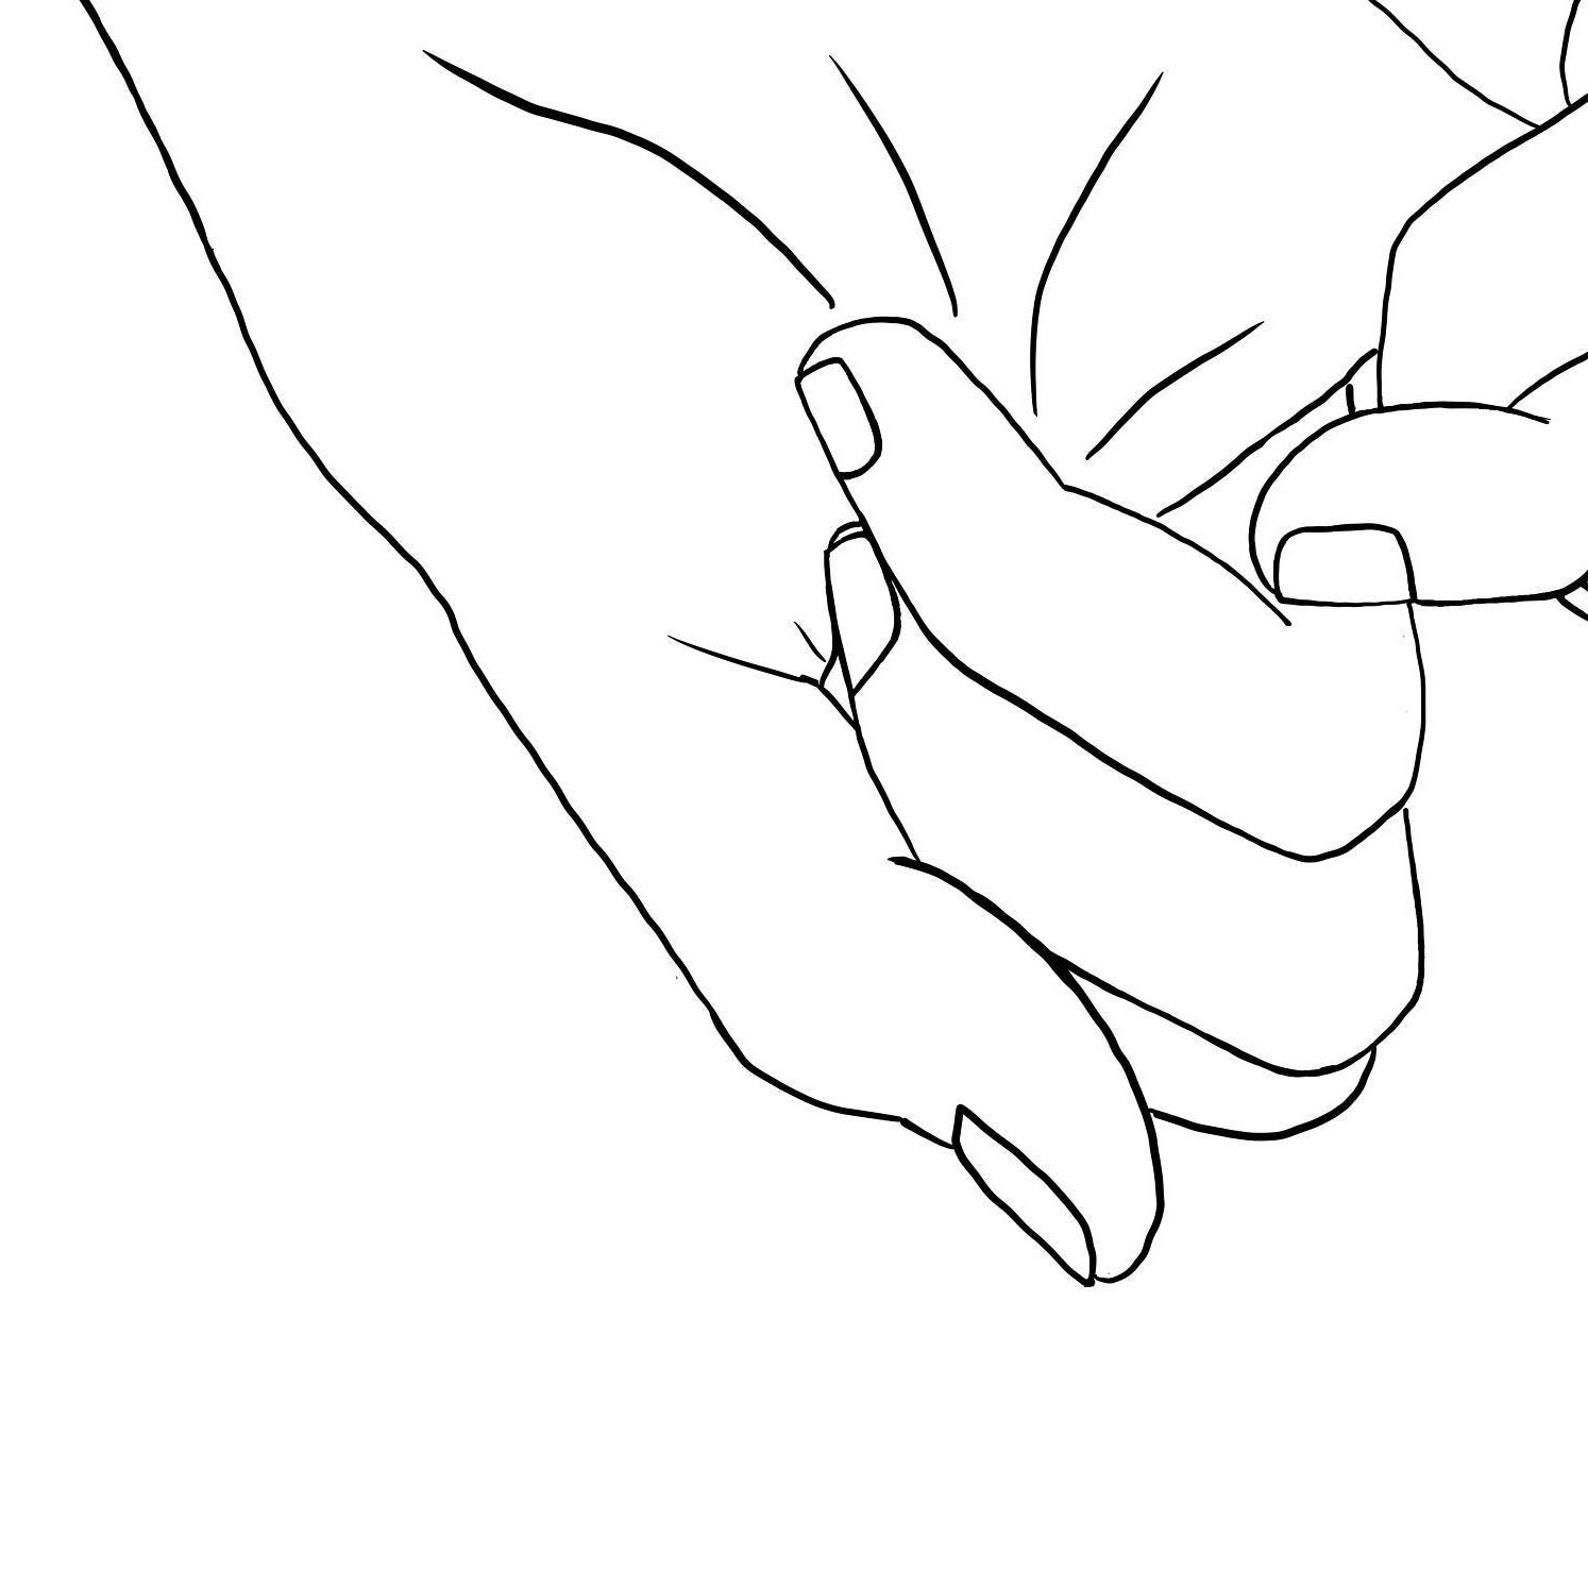 Pinky Link Holding Hands Line Art Poster Print, Little Pinky Fingers ...